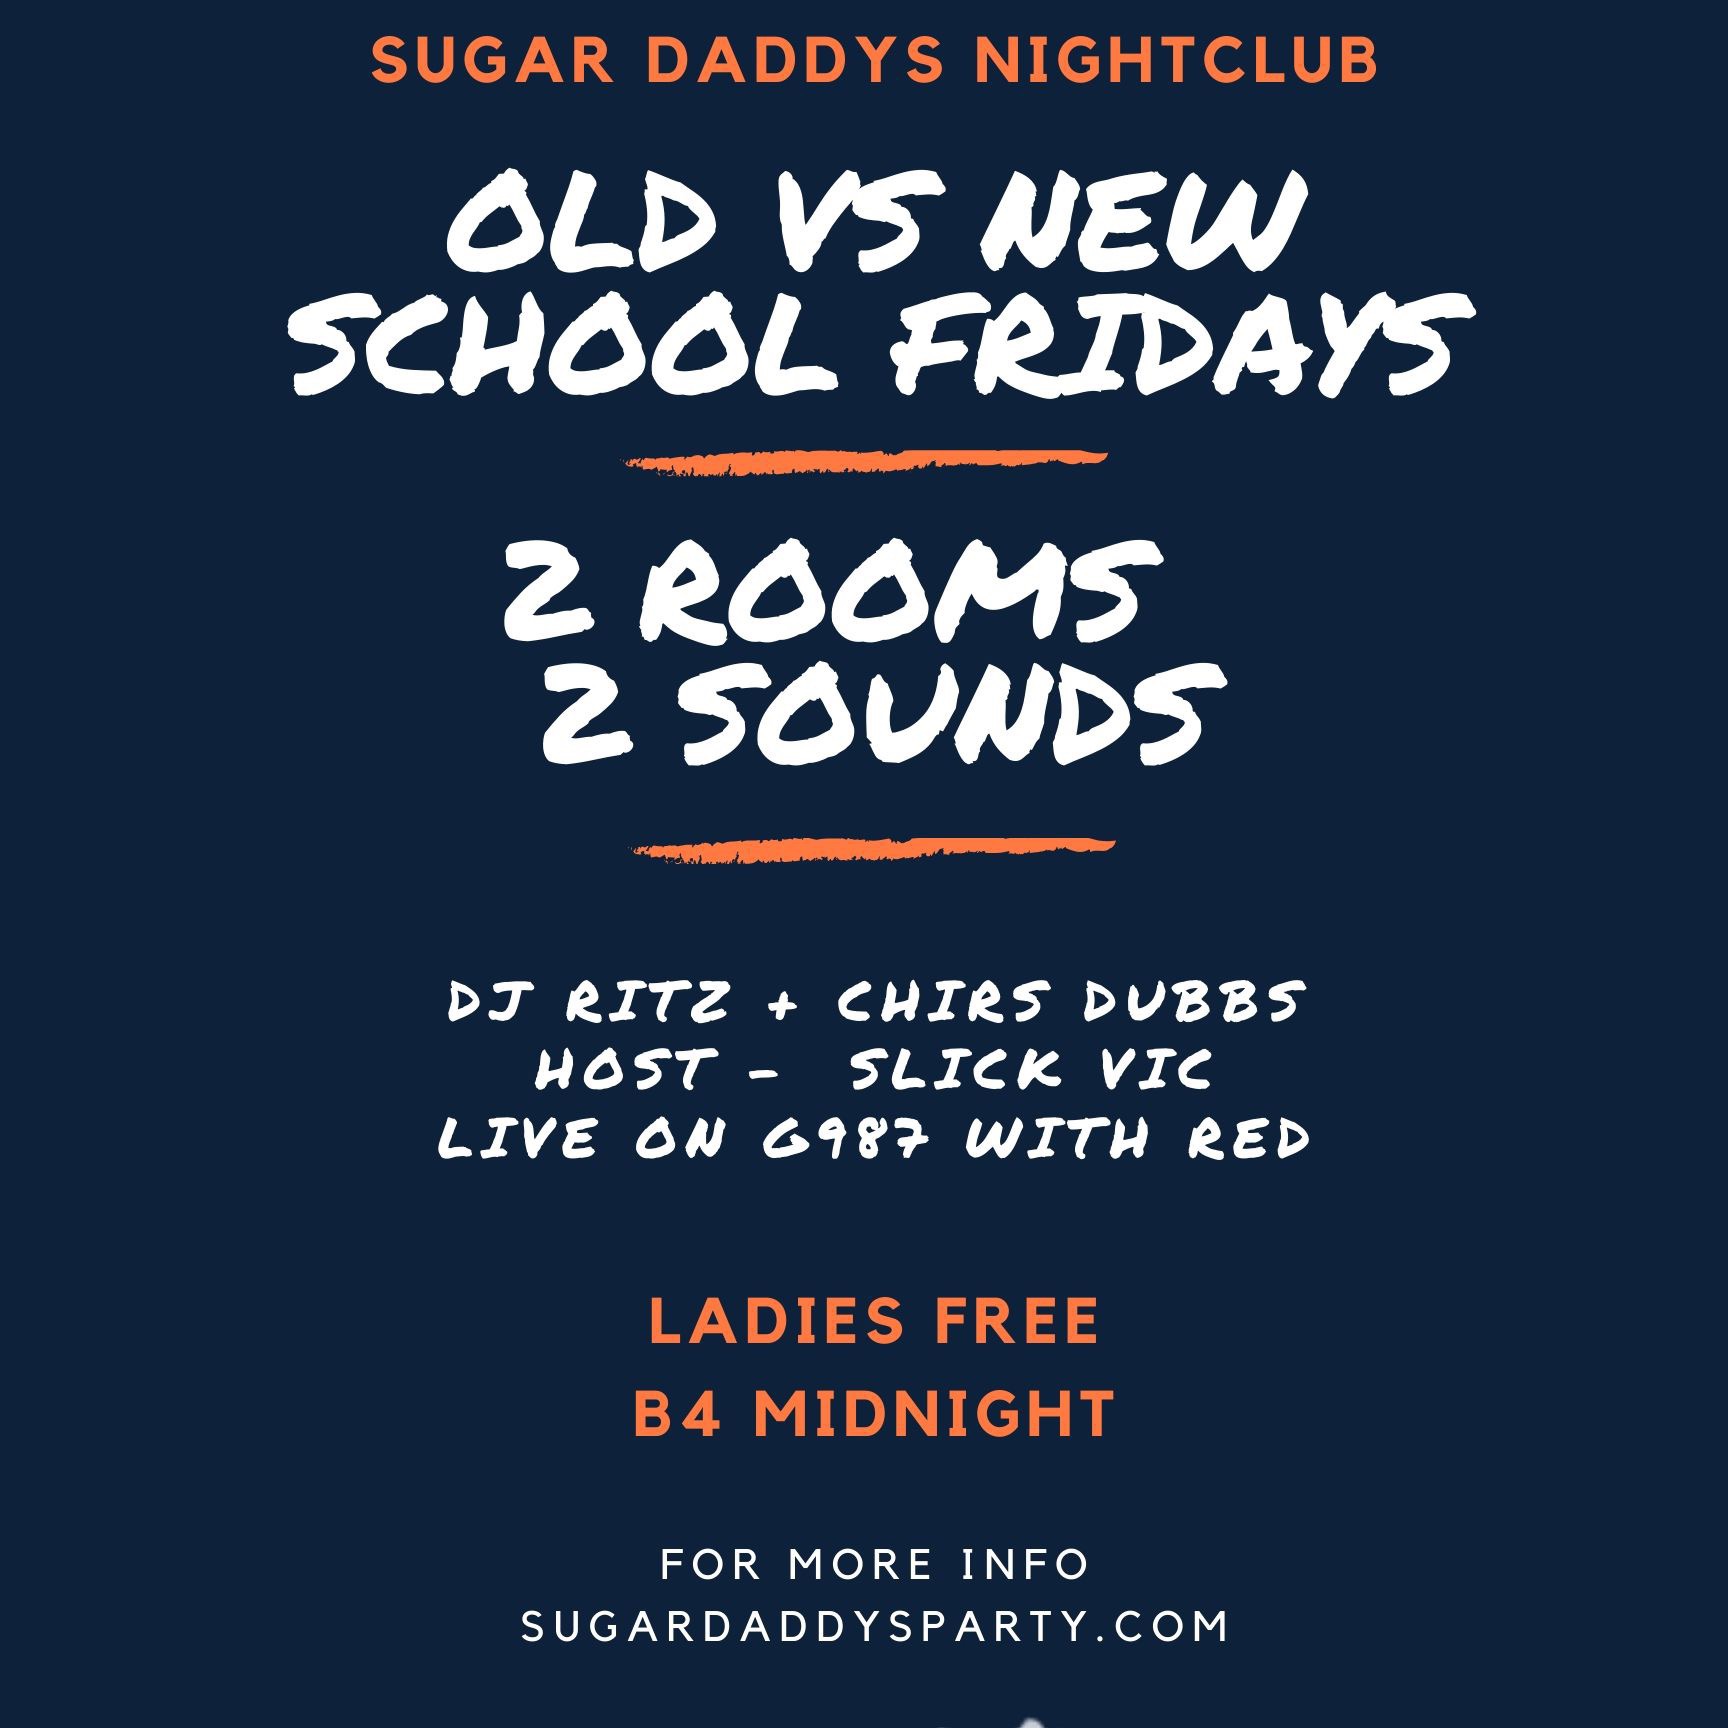 OLD VS NEW SCHOOL FRIDAY SUGAR DADDYS 2 ROOMS 2 SOUNDS LIVE G987 W/ DJ RITZ